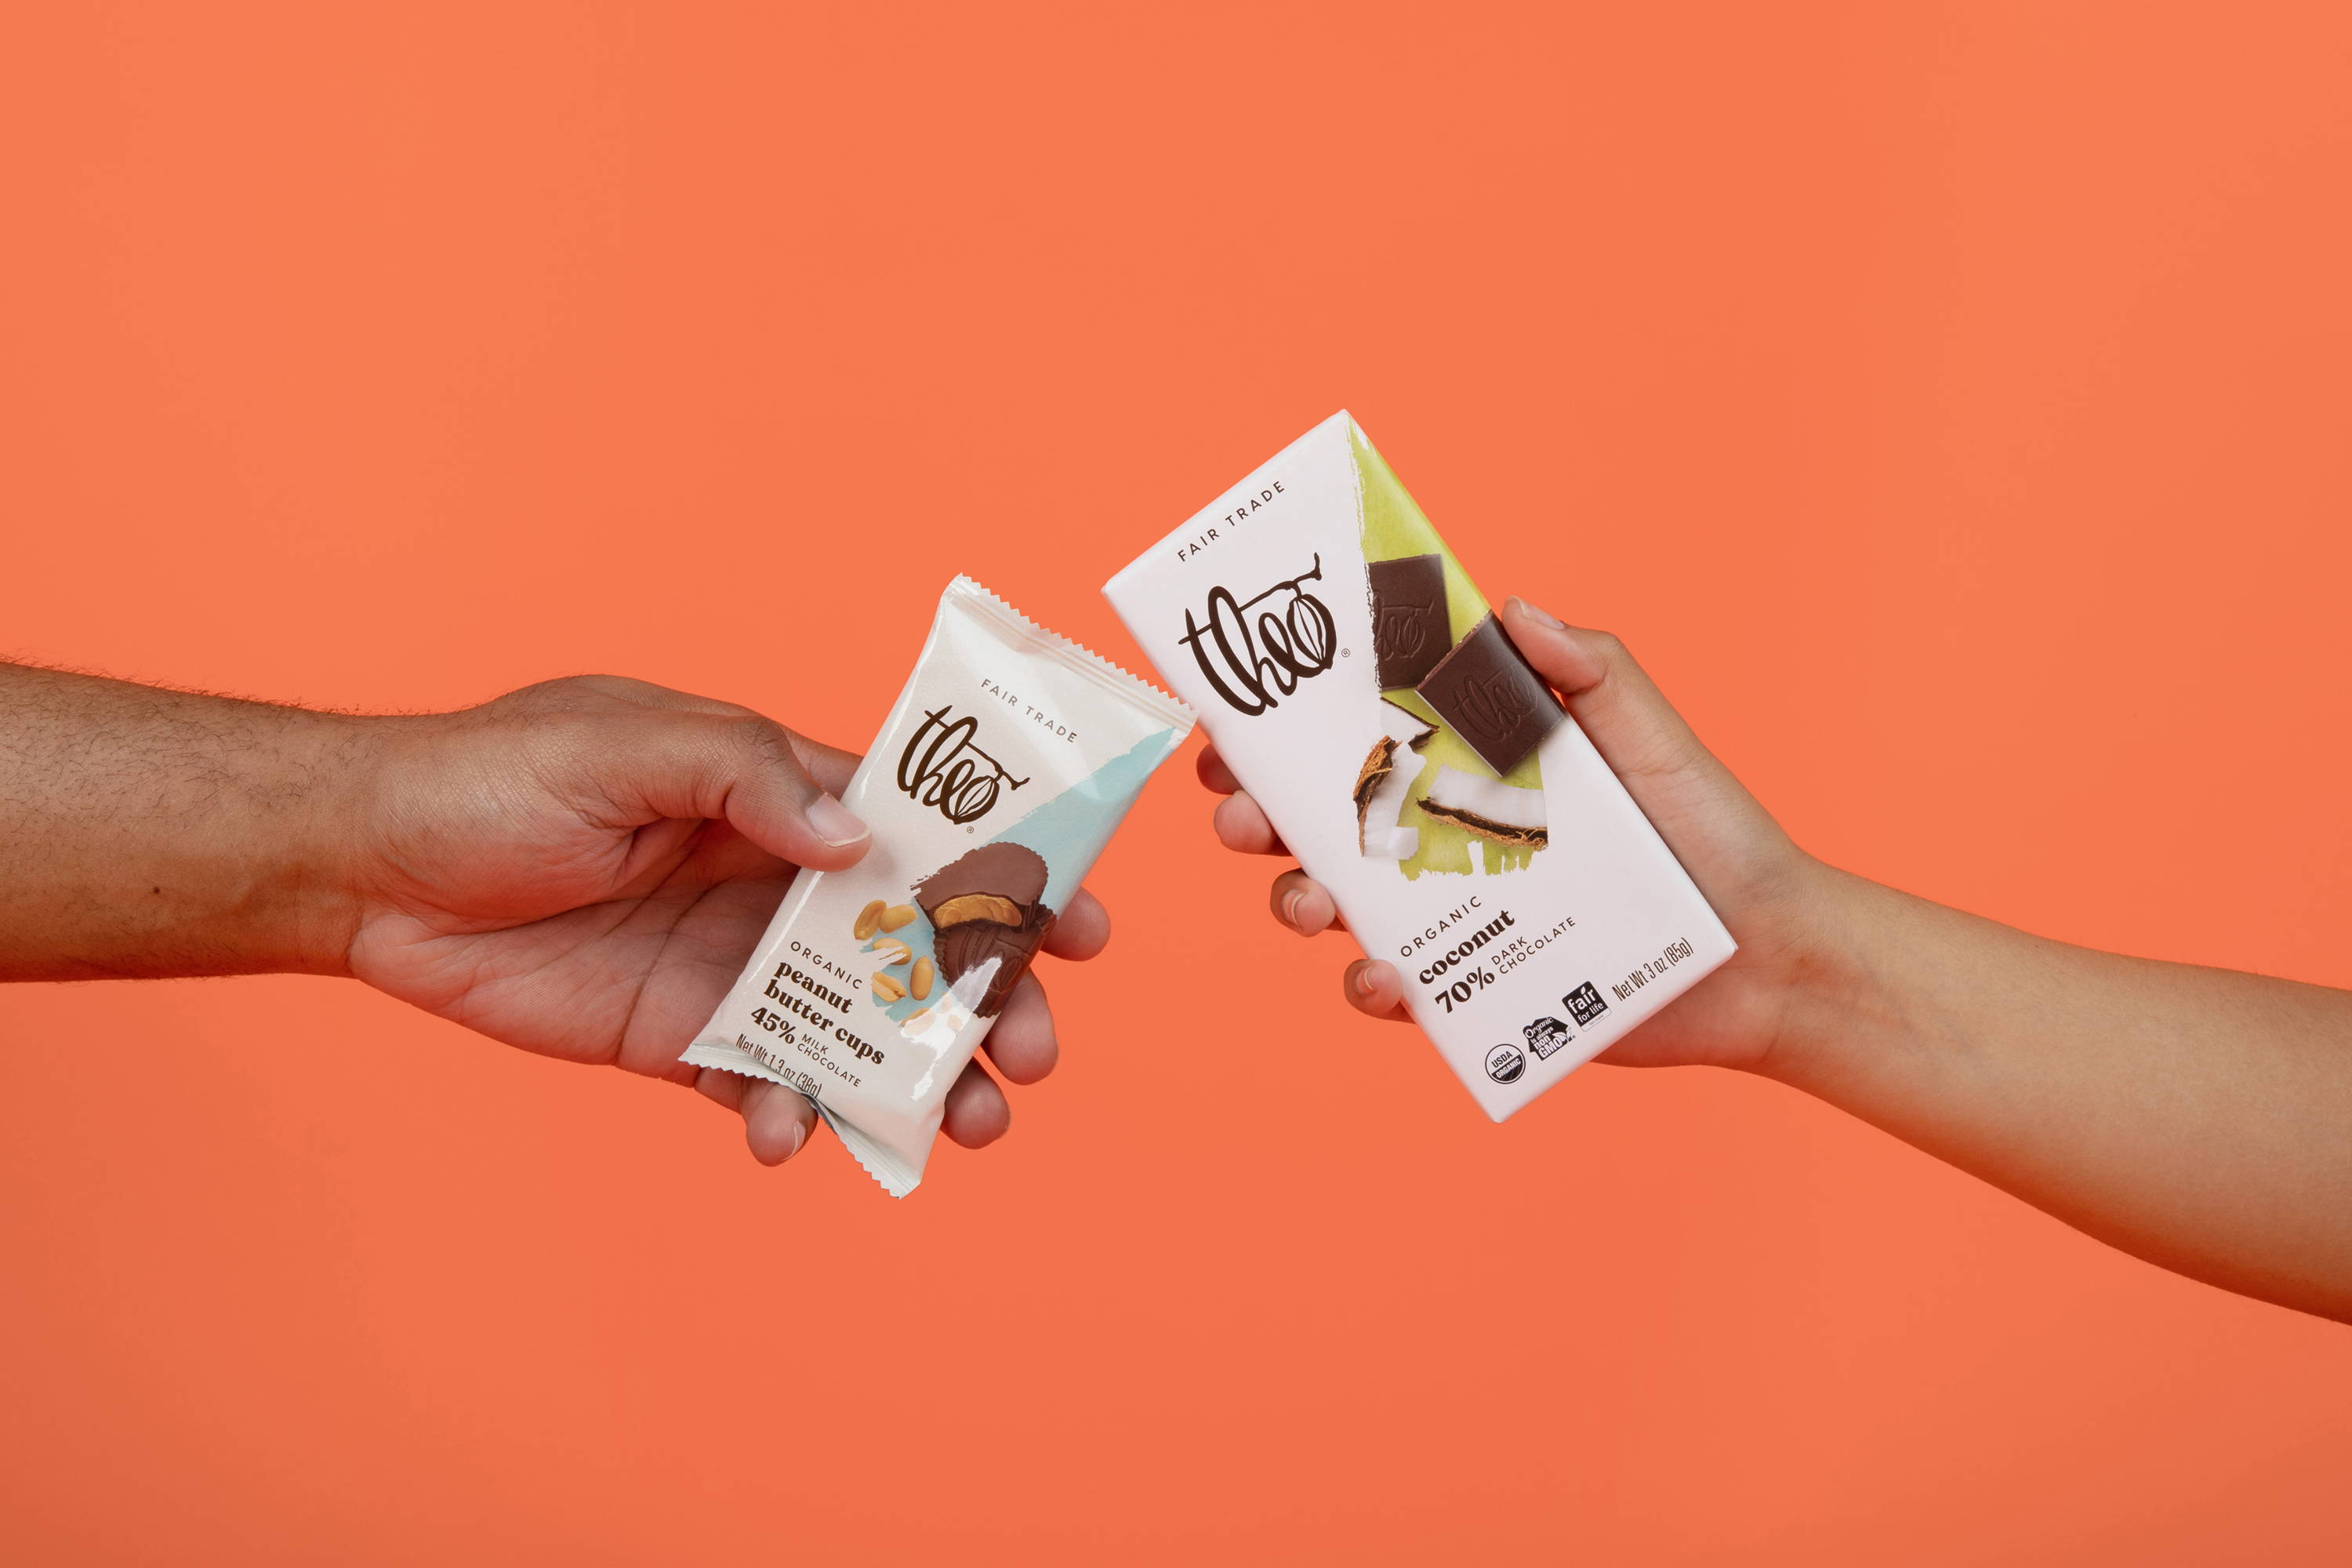 Two hands reaching out with chocolate treats in packaging against an orange background.